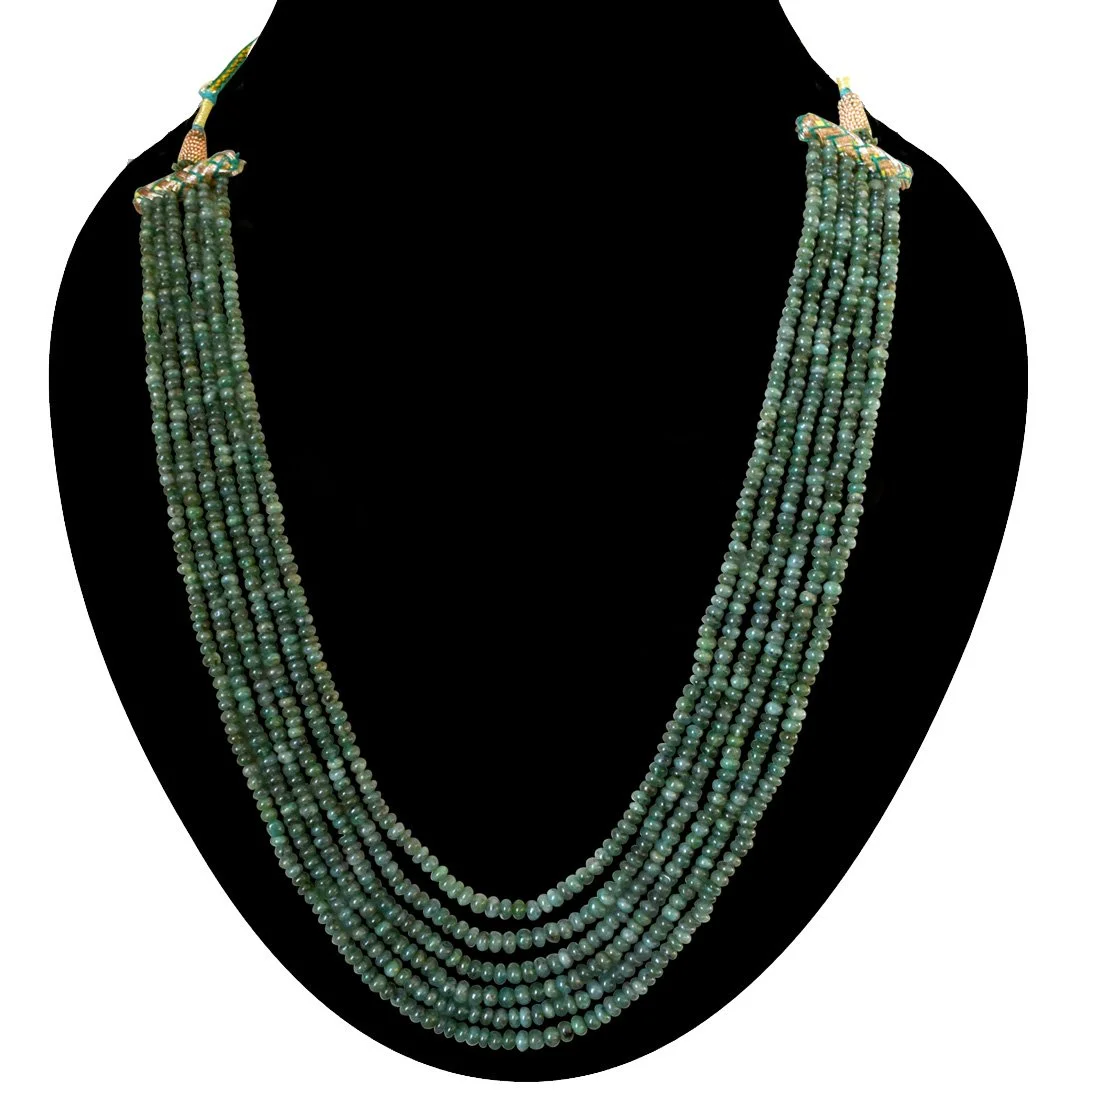 6 Line 265cts REAL Natural Green Emerald Beads Necklace for Women (265cts EMR Neck)